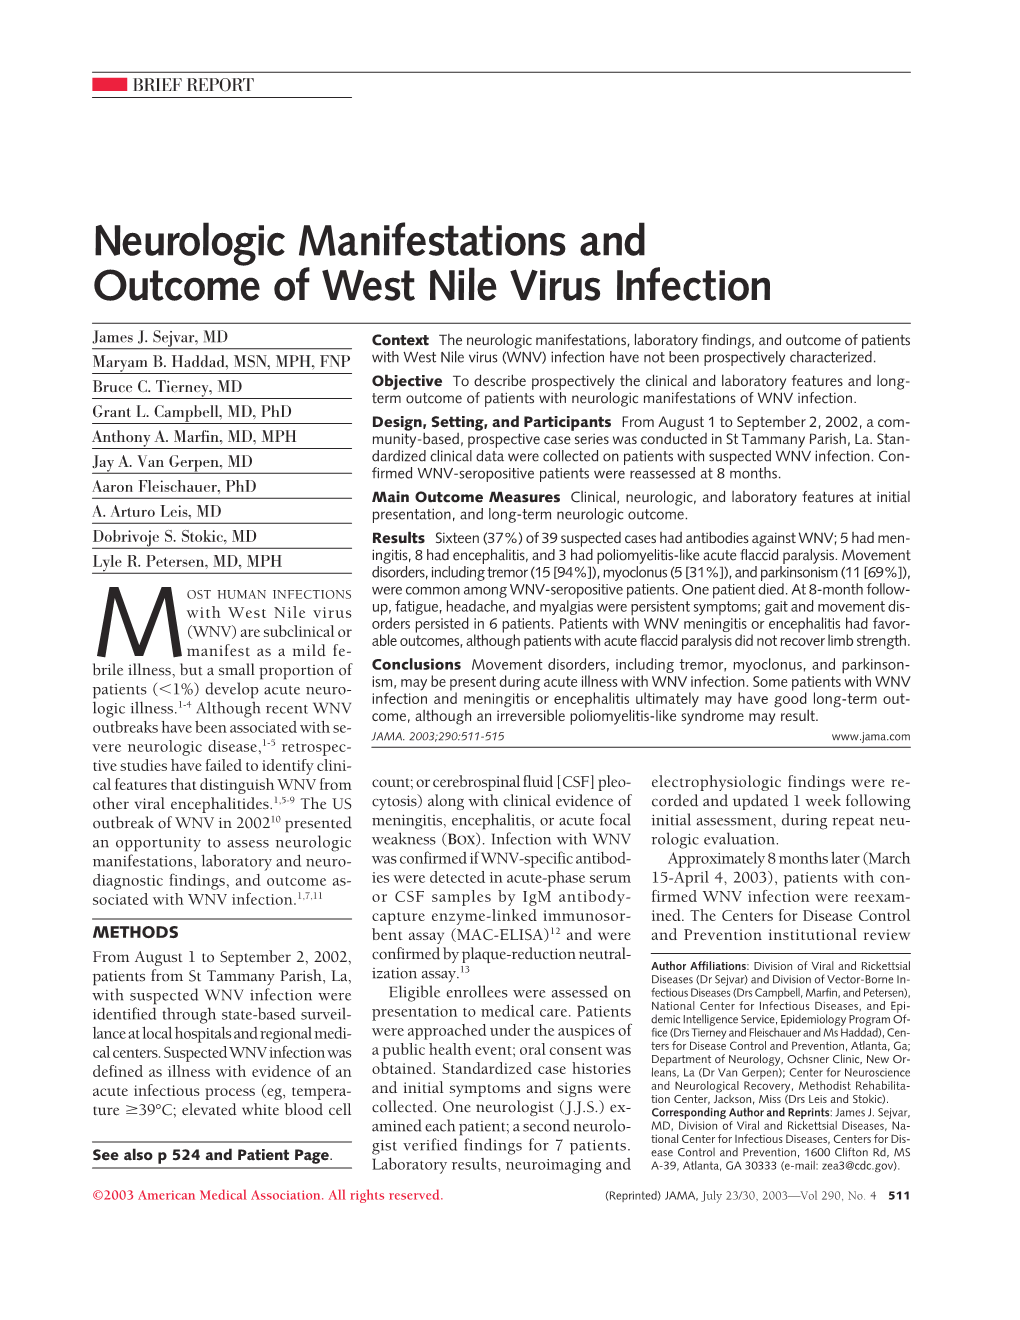 Neurologic Manifestations and Outcome of West Nile Virus Infection